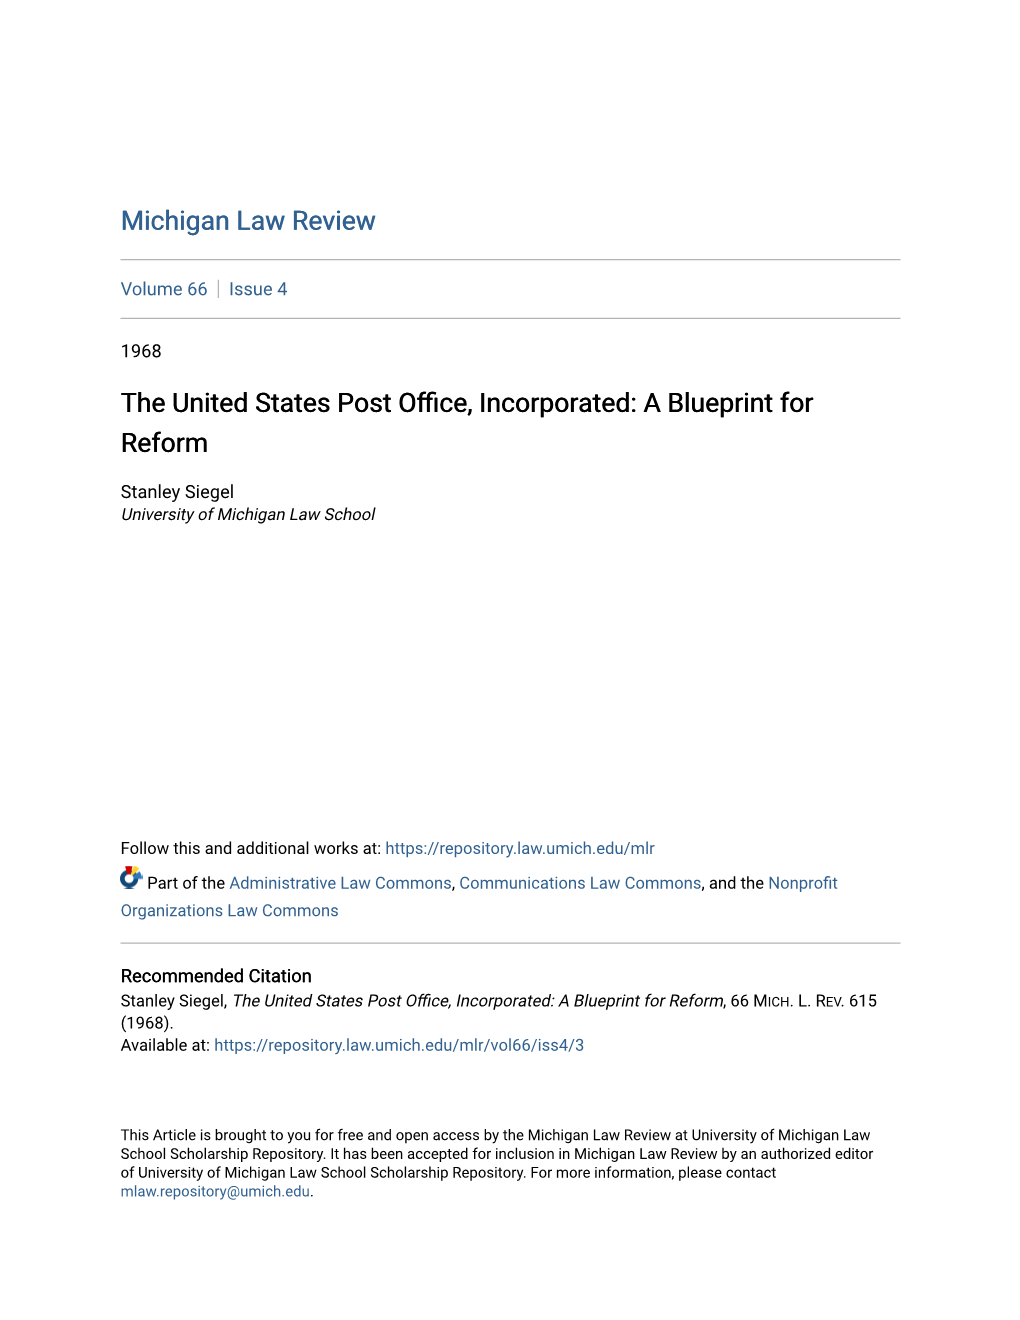 The United States Post Office, Incorporated: a Blueprint for Reform